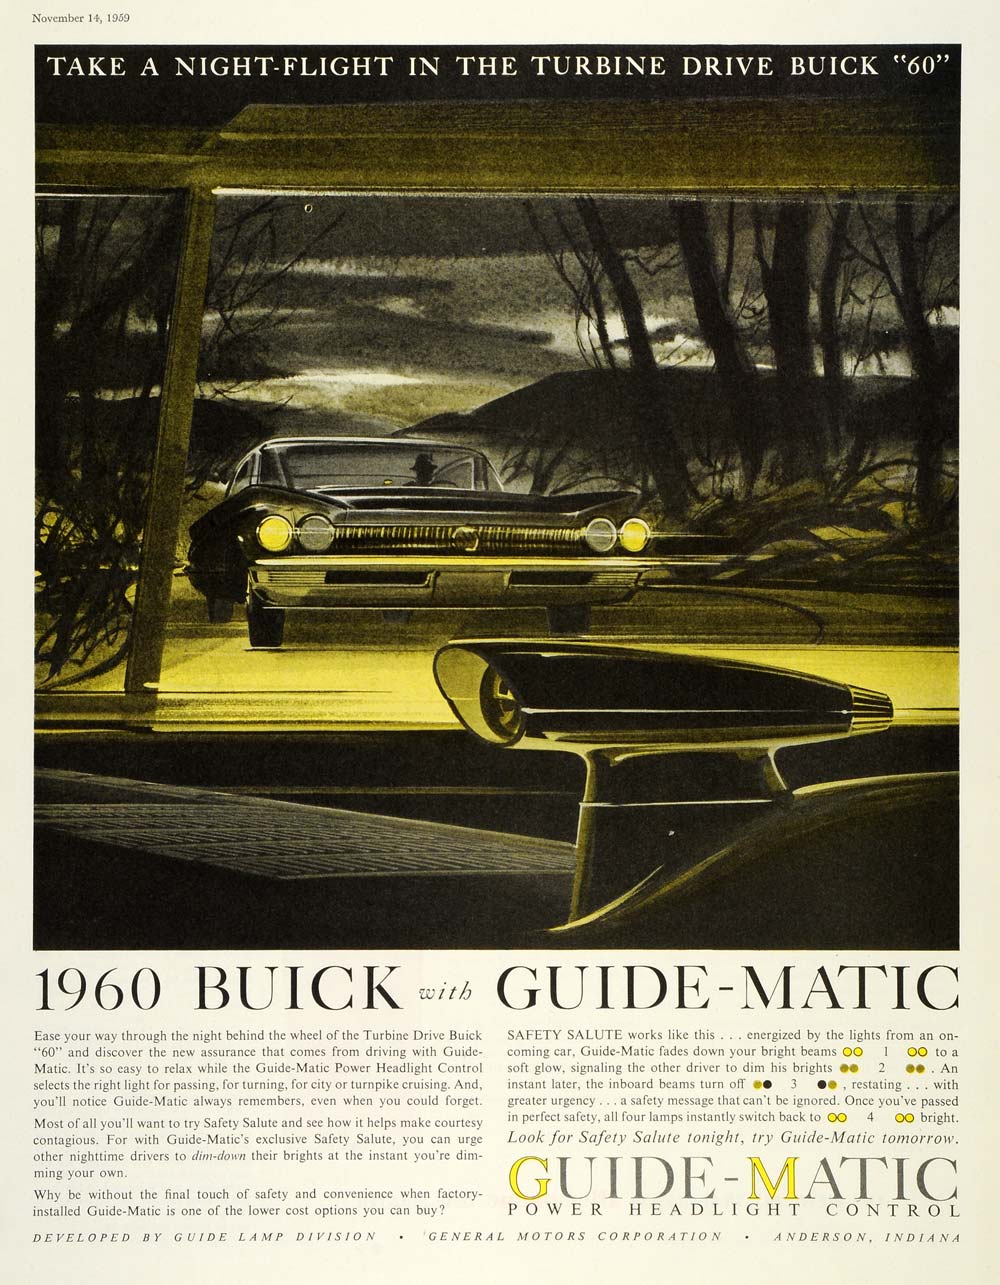 1959 Ad Vintage Guide Matic Power Headlight Control Safety Feature 1960 SEP5